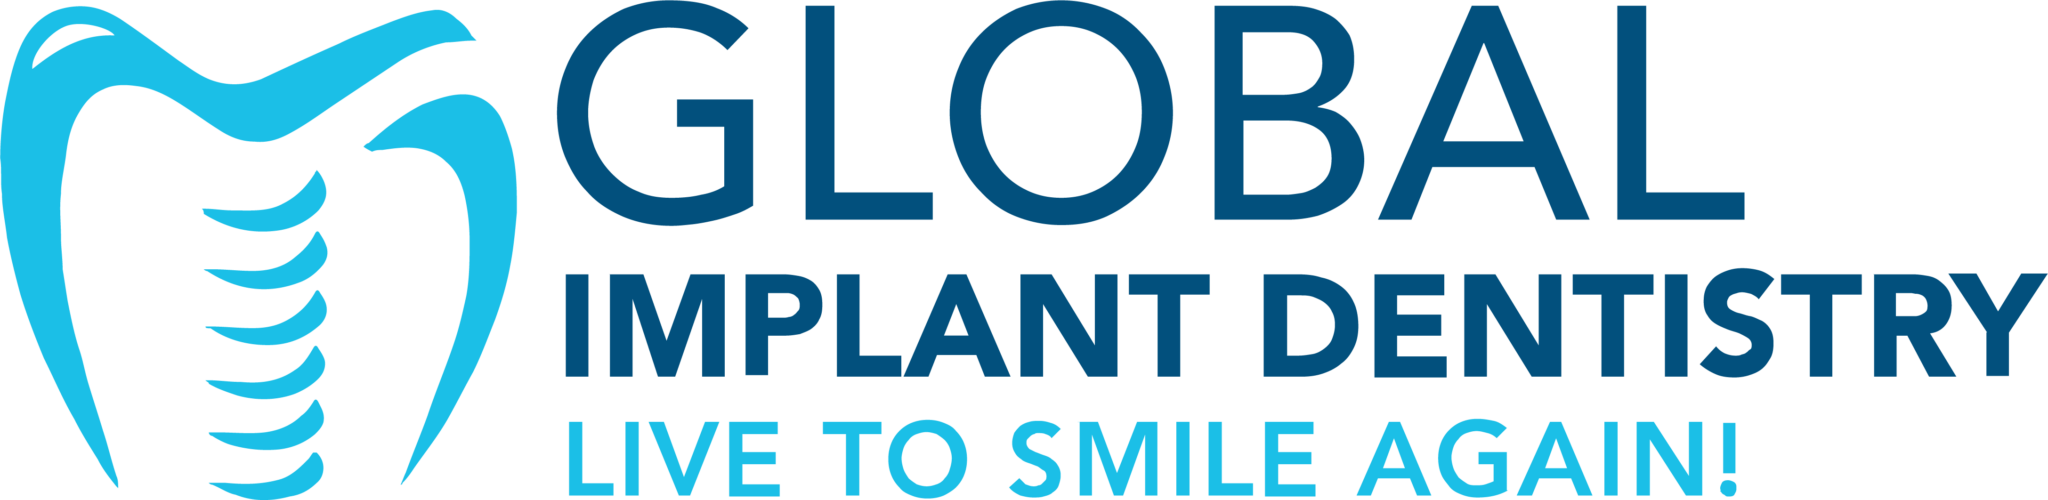 Business logo of Global Implant Dentistry